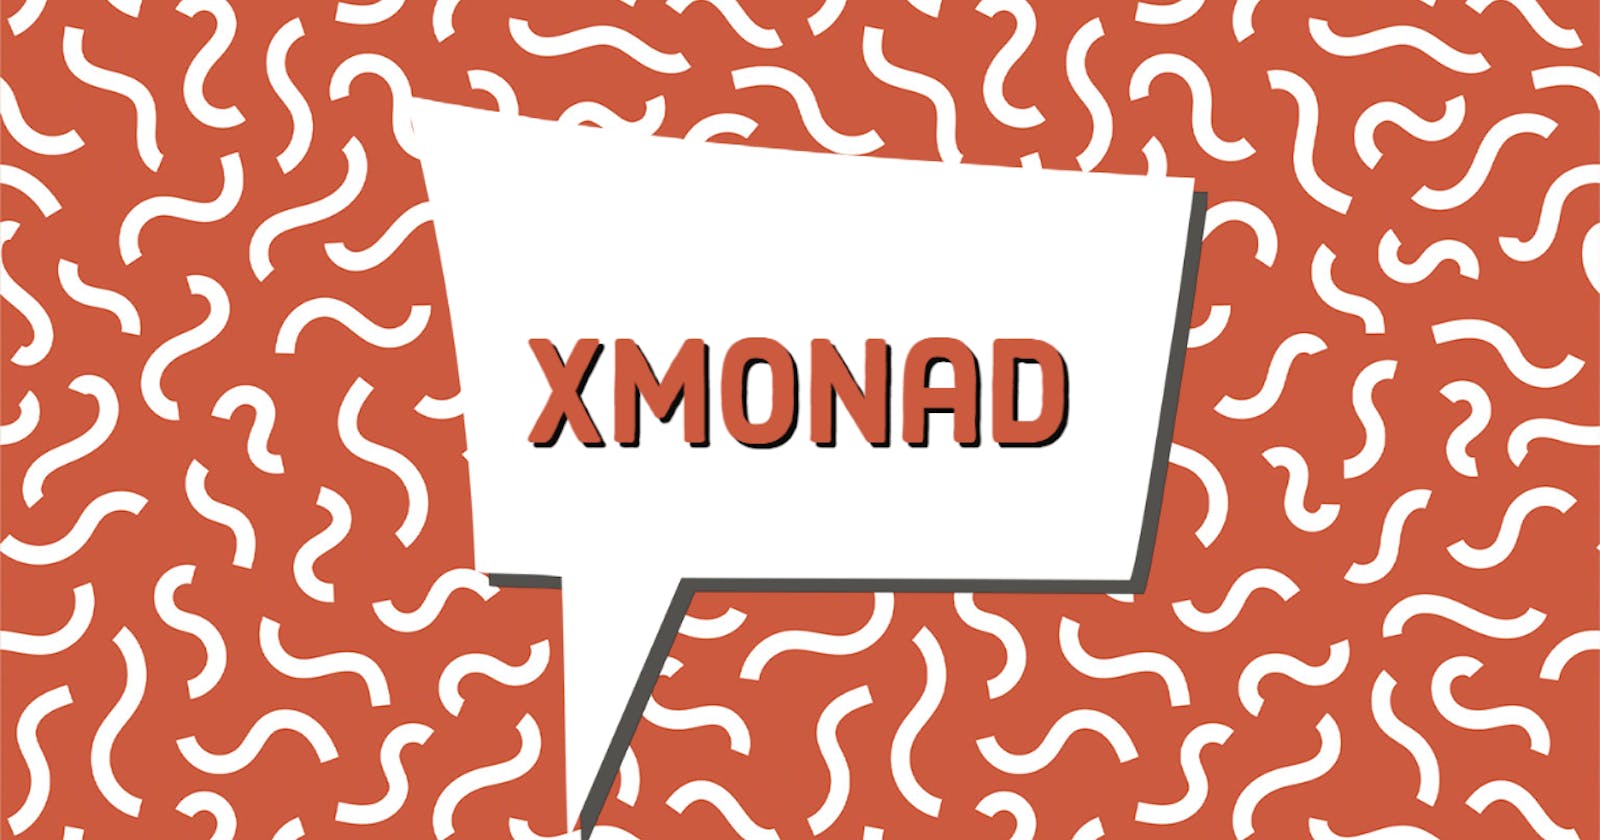 The xmonad Window Manager on Arch Linux